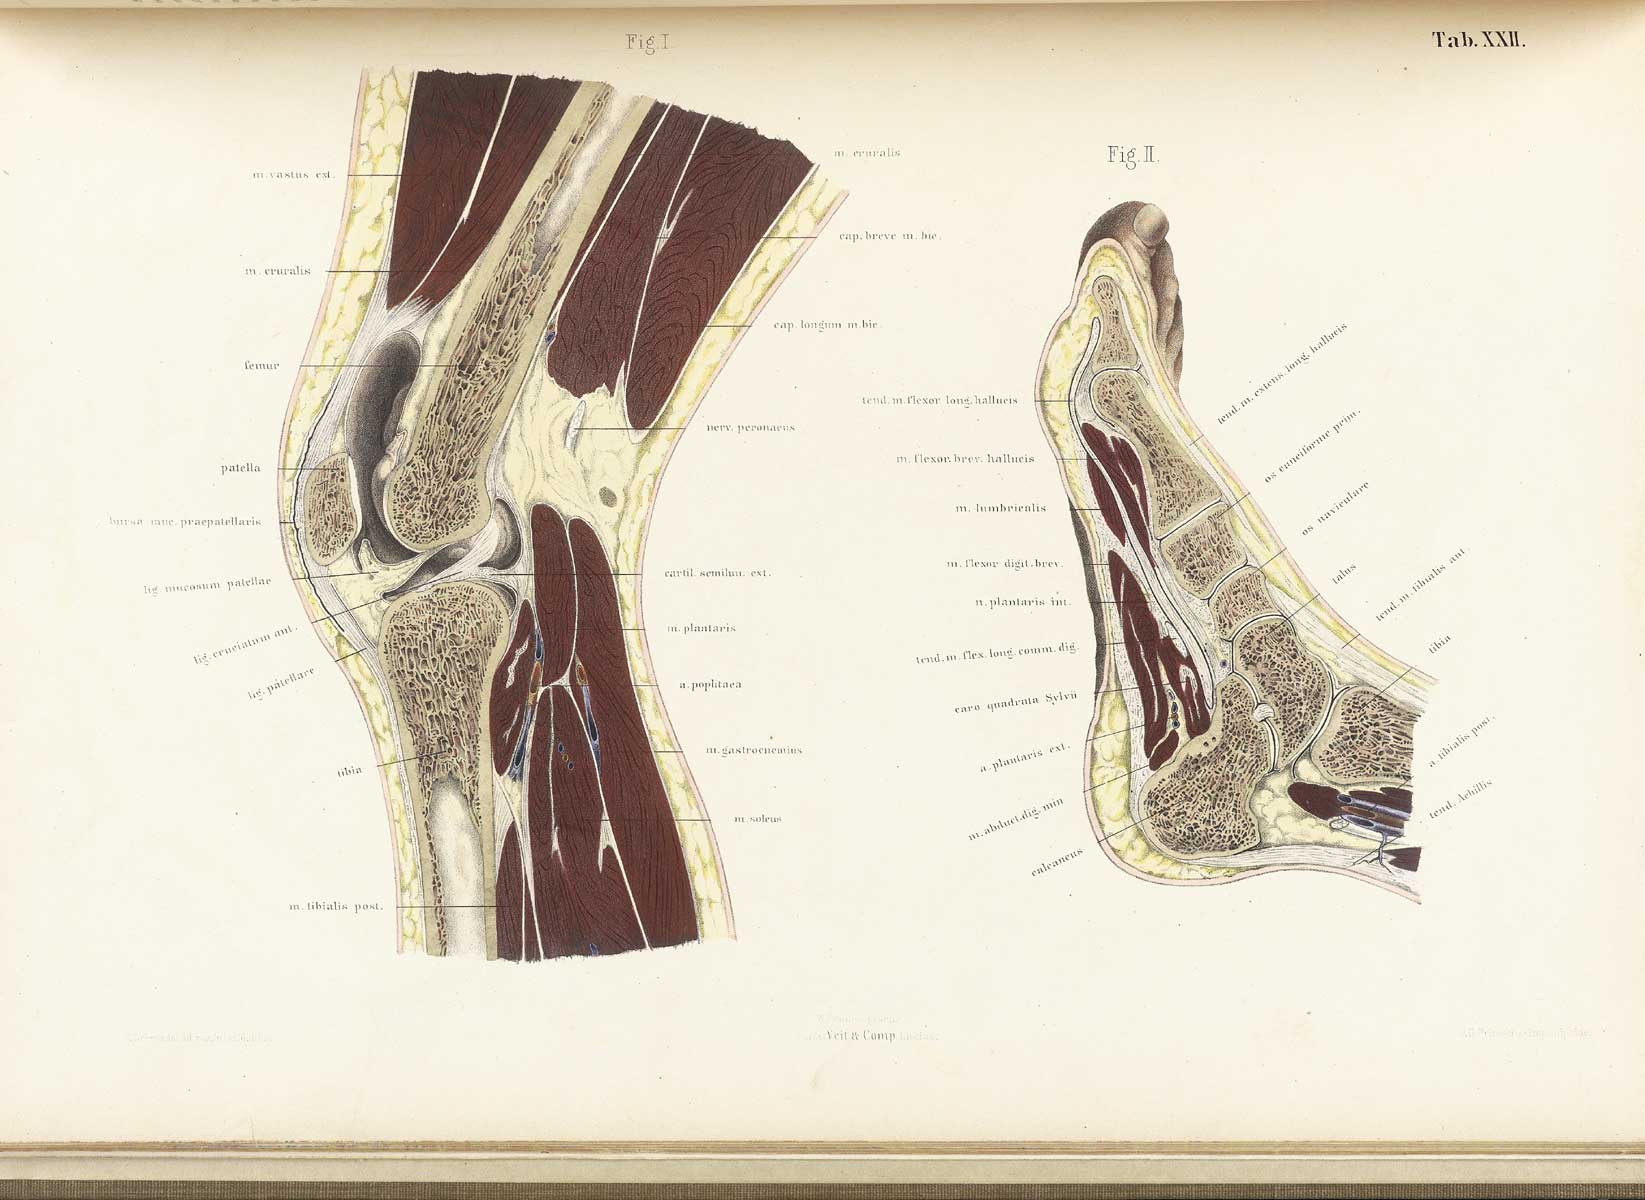 Chromolithograph of cross-sections of the knee on the left and the foot on the right, showing the bones, muscles, cartilage and other structures, from Wilhelm Braune’s Topographisch-anatomischer Atlas. Leipzig, 1867.